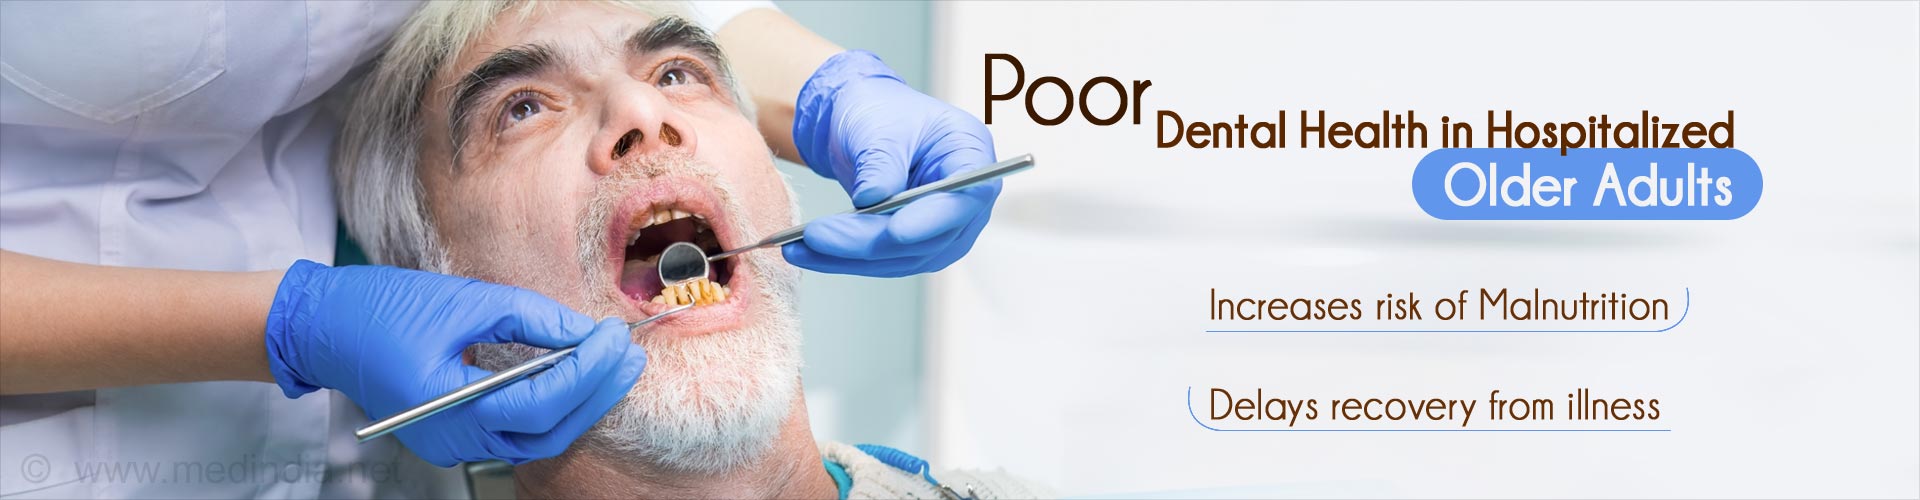 poor dental health in hospitalized older adults
- increases risk of malnutrition
- delays recovery from illness